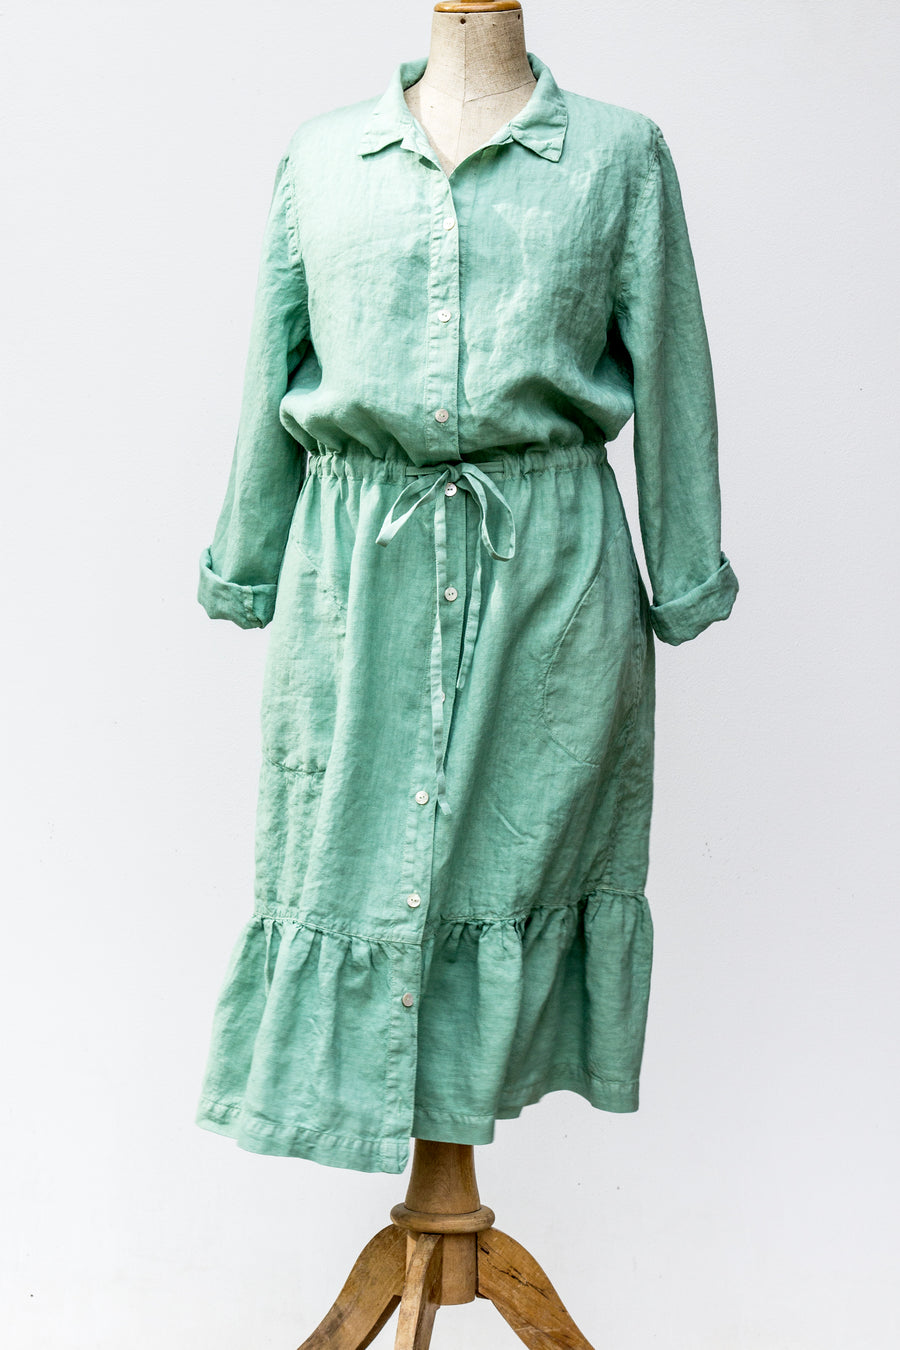 Shirt dress with canier in Neptune Green shade